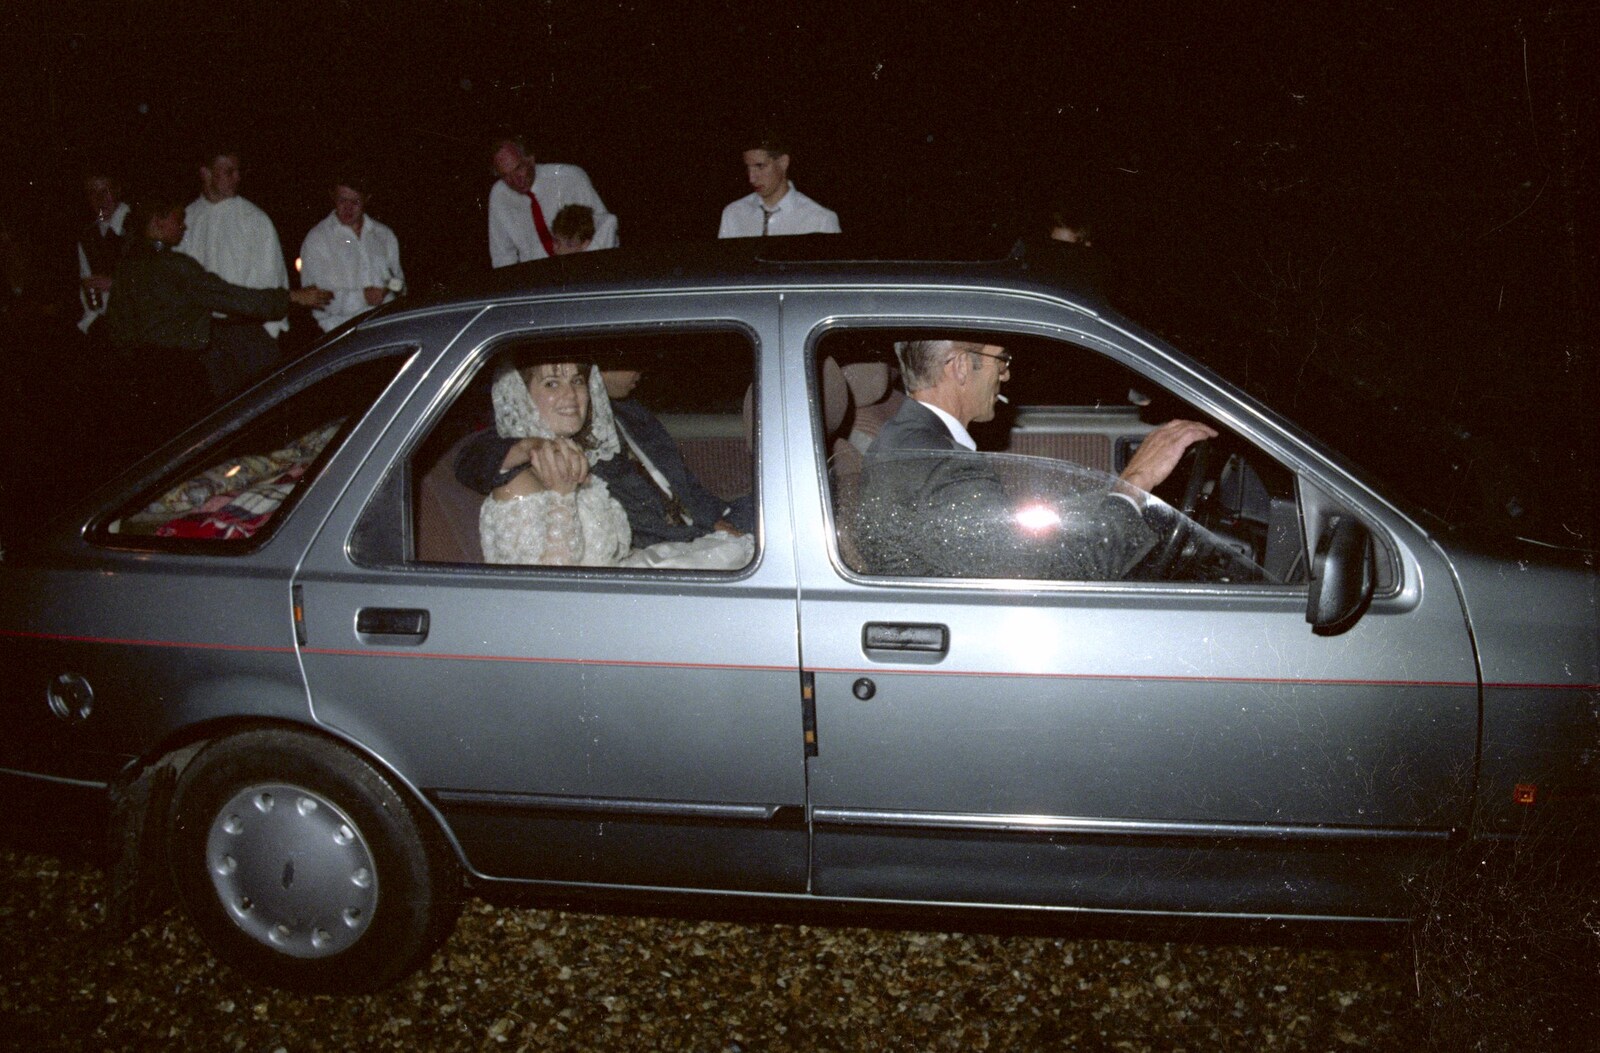 Kelly is driven away from Printec Kelly's Wedding, Eye, Suffolk - 25th April 1992